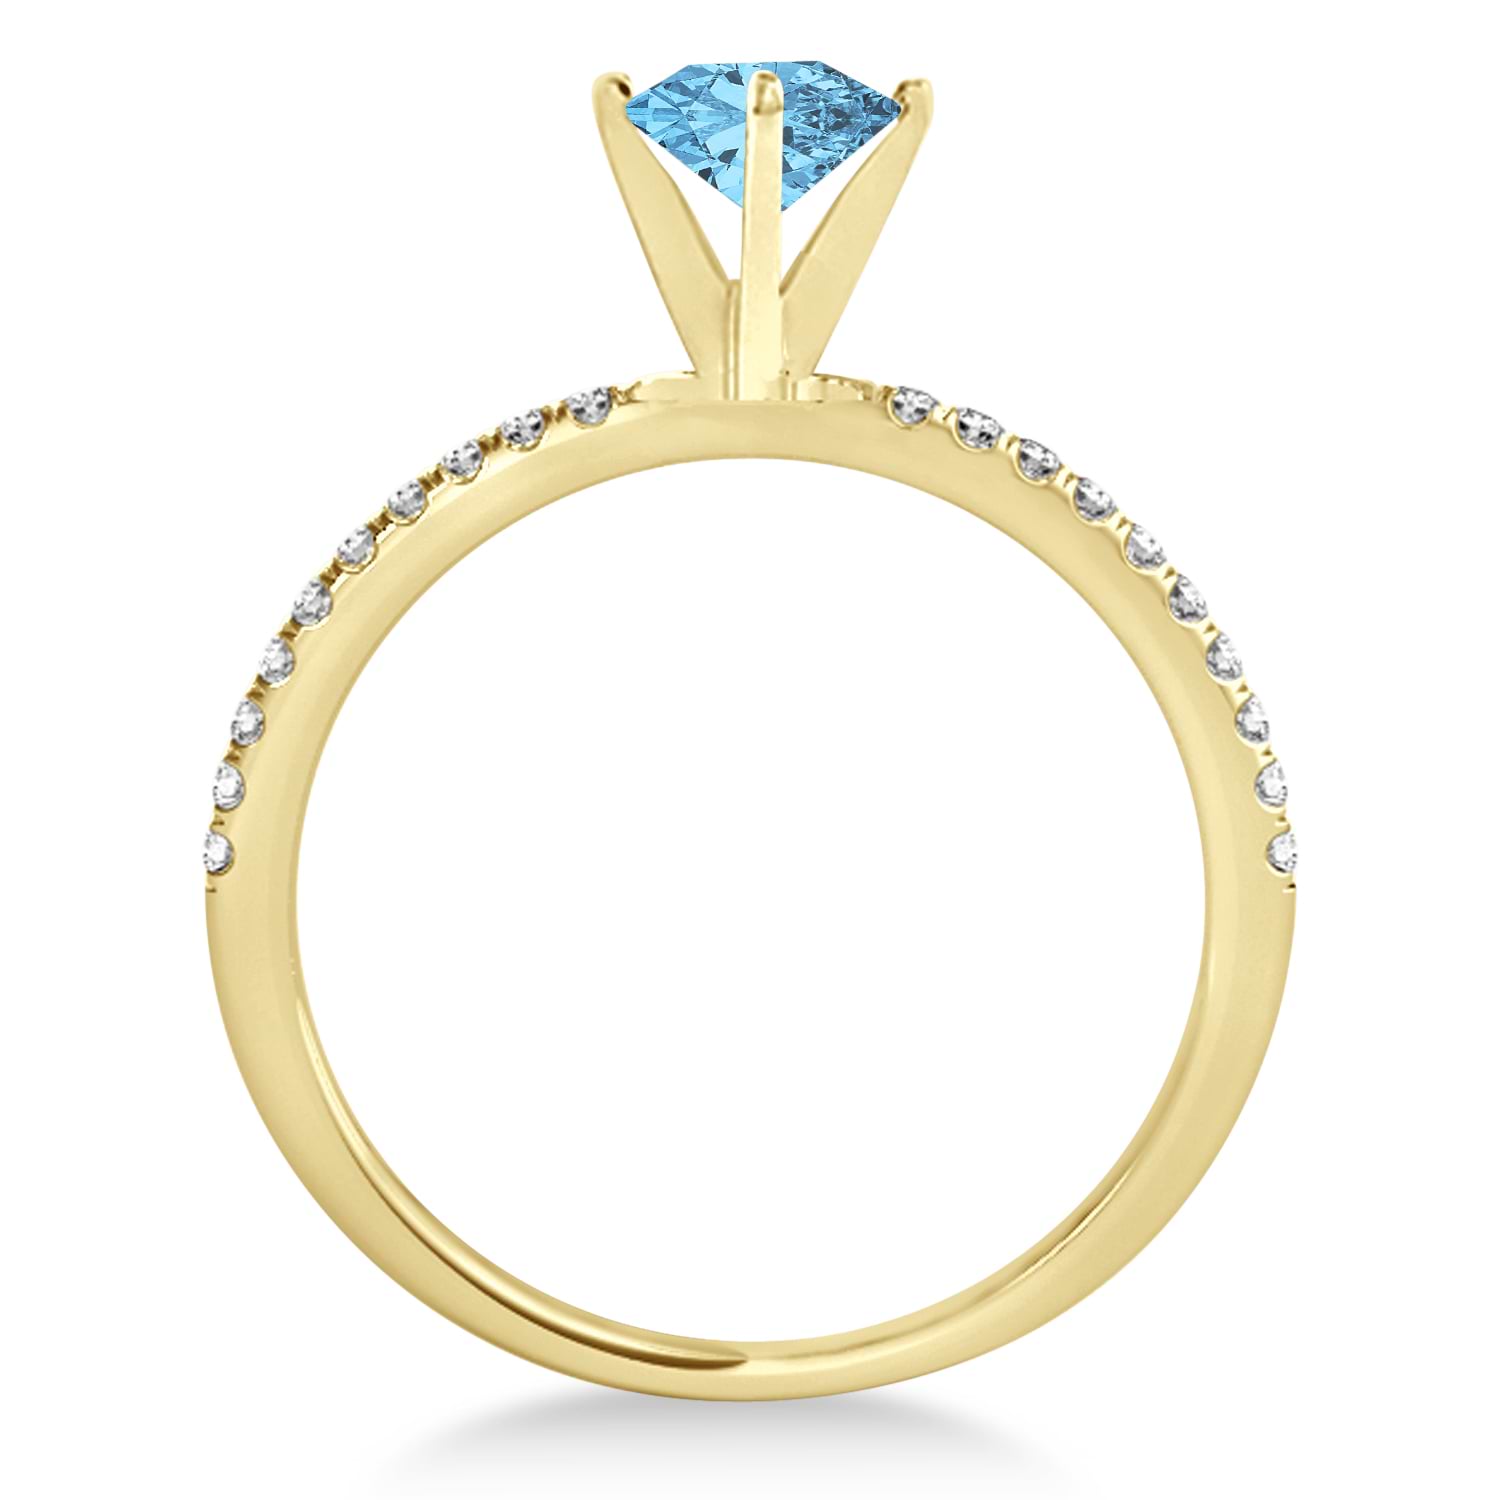 Blue Topaz & Diamond Accented Oval Shape Engagement Ring 14k Yellow Gold (3.00ct)